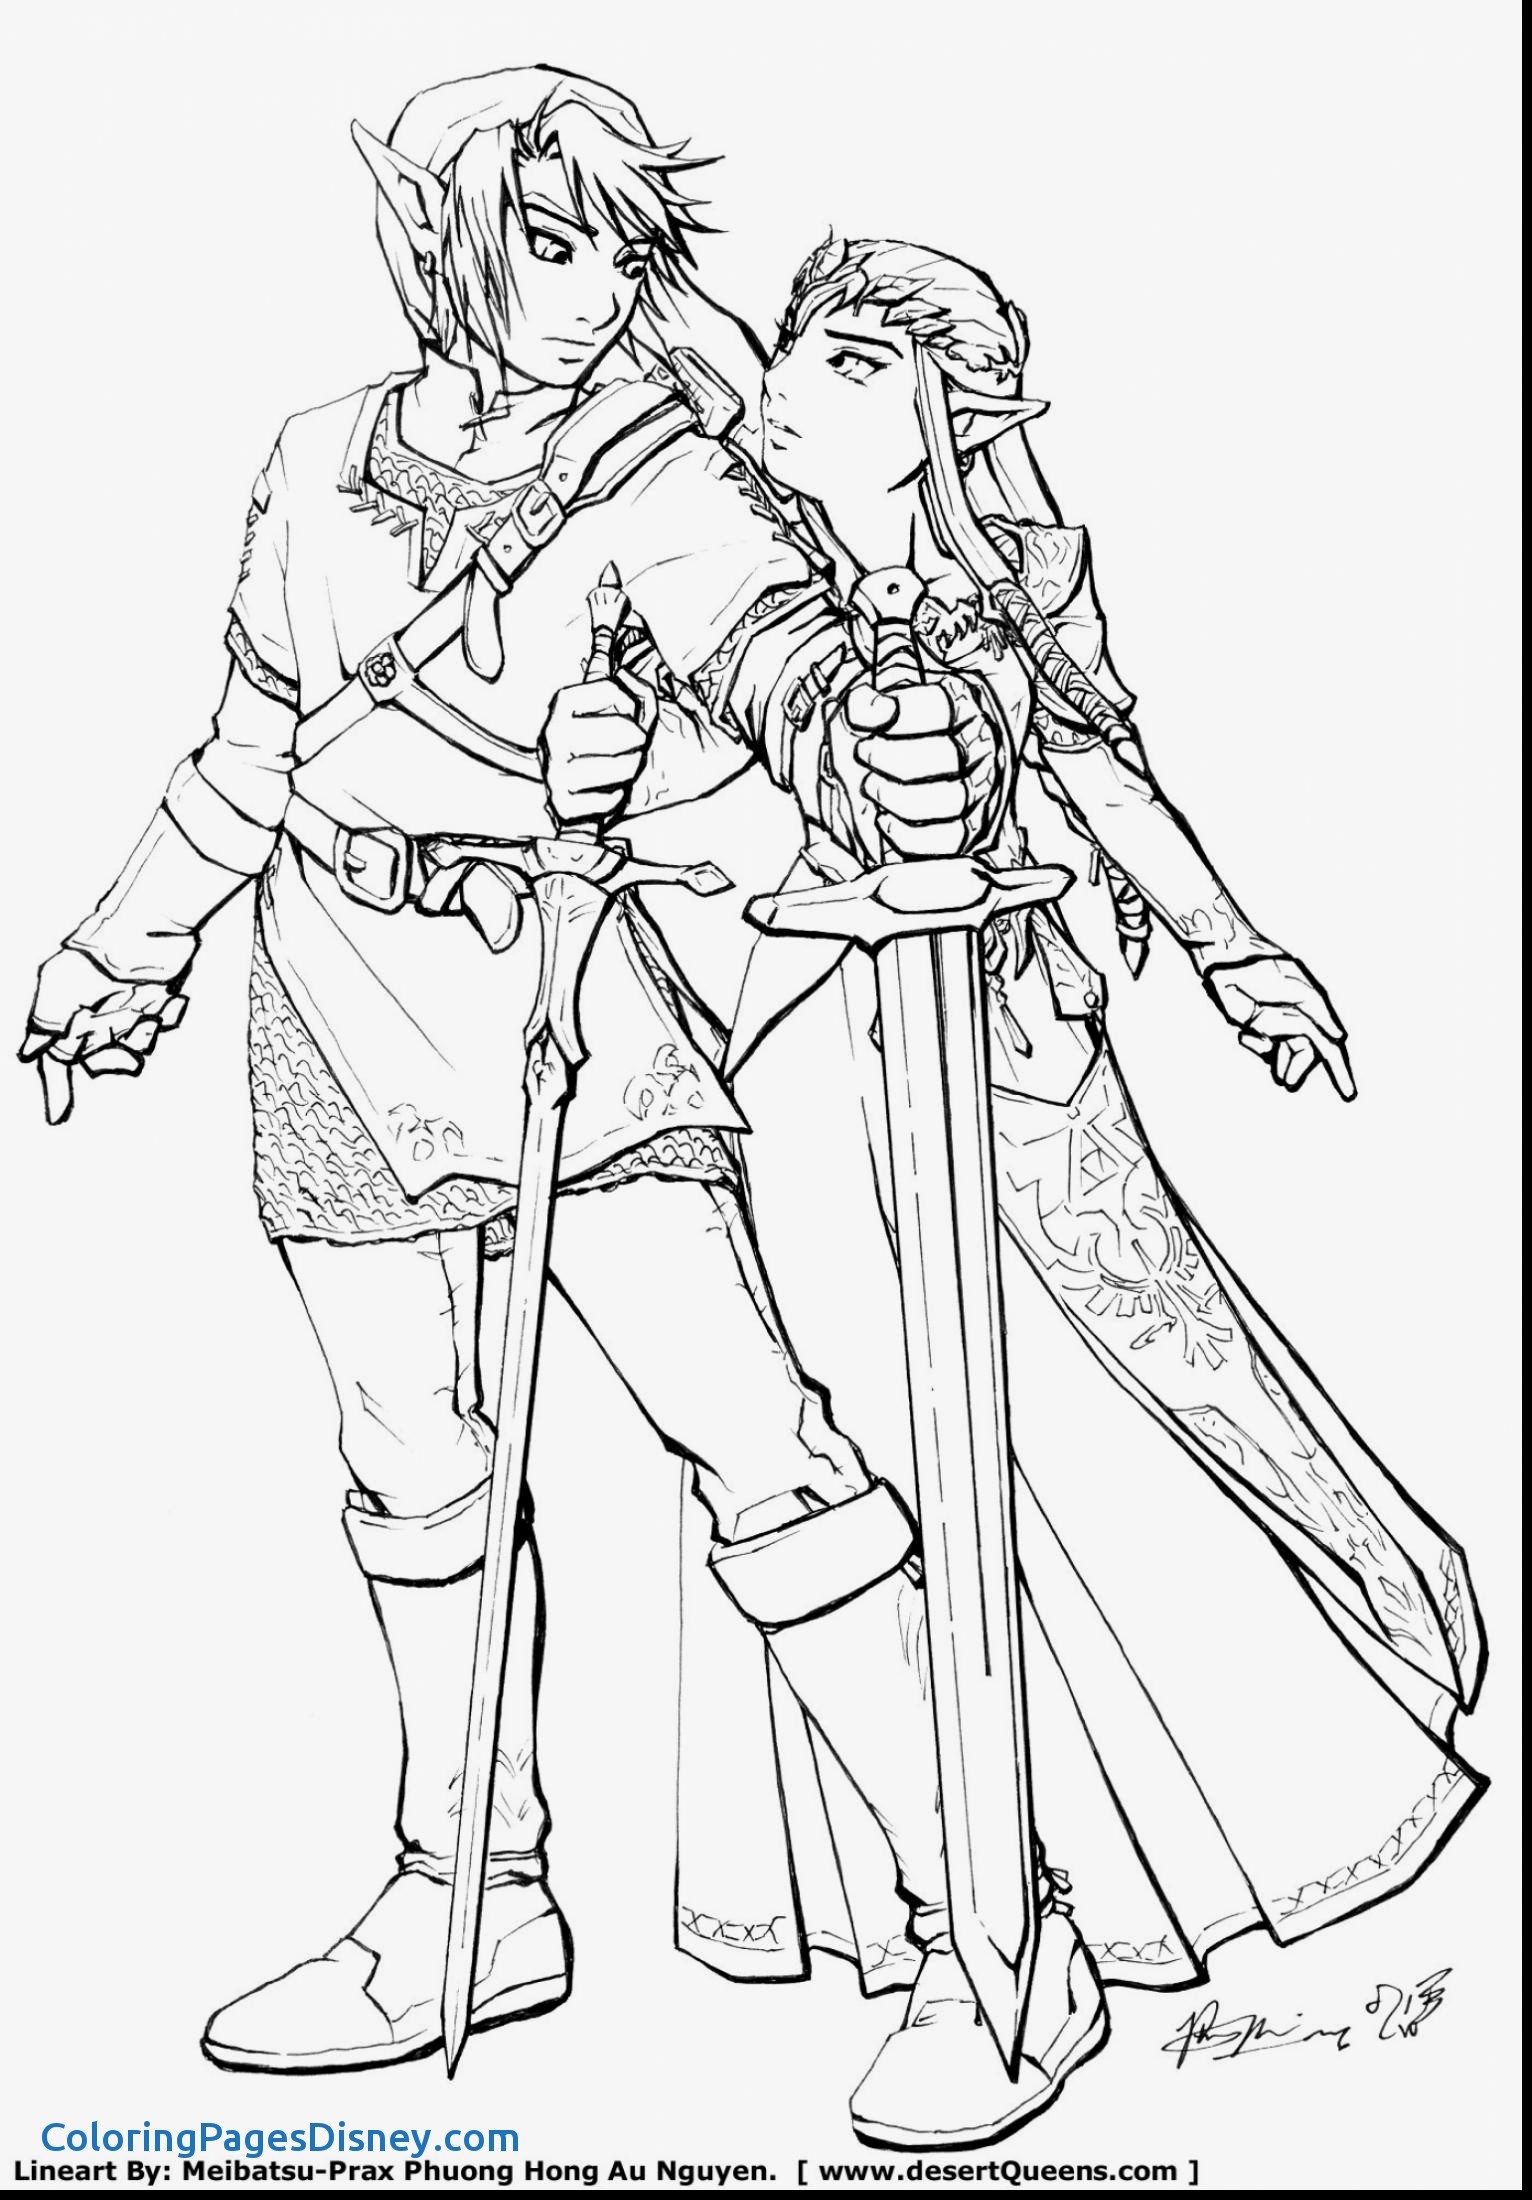 Link Twilight Princess Coloring Pages Wallpaper